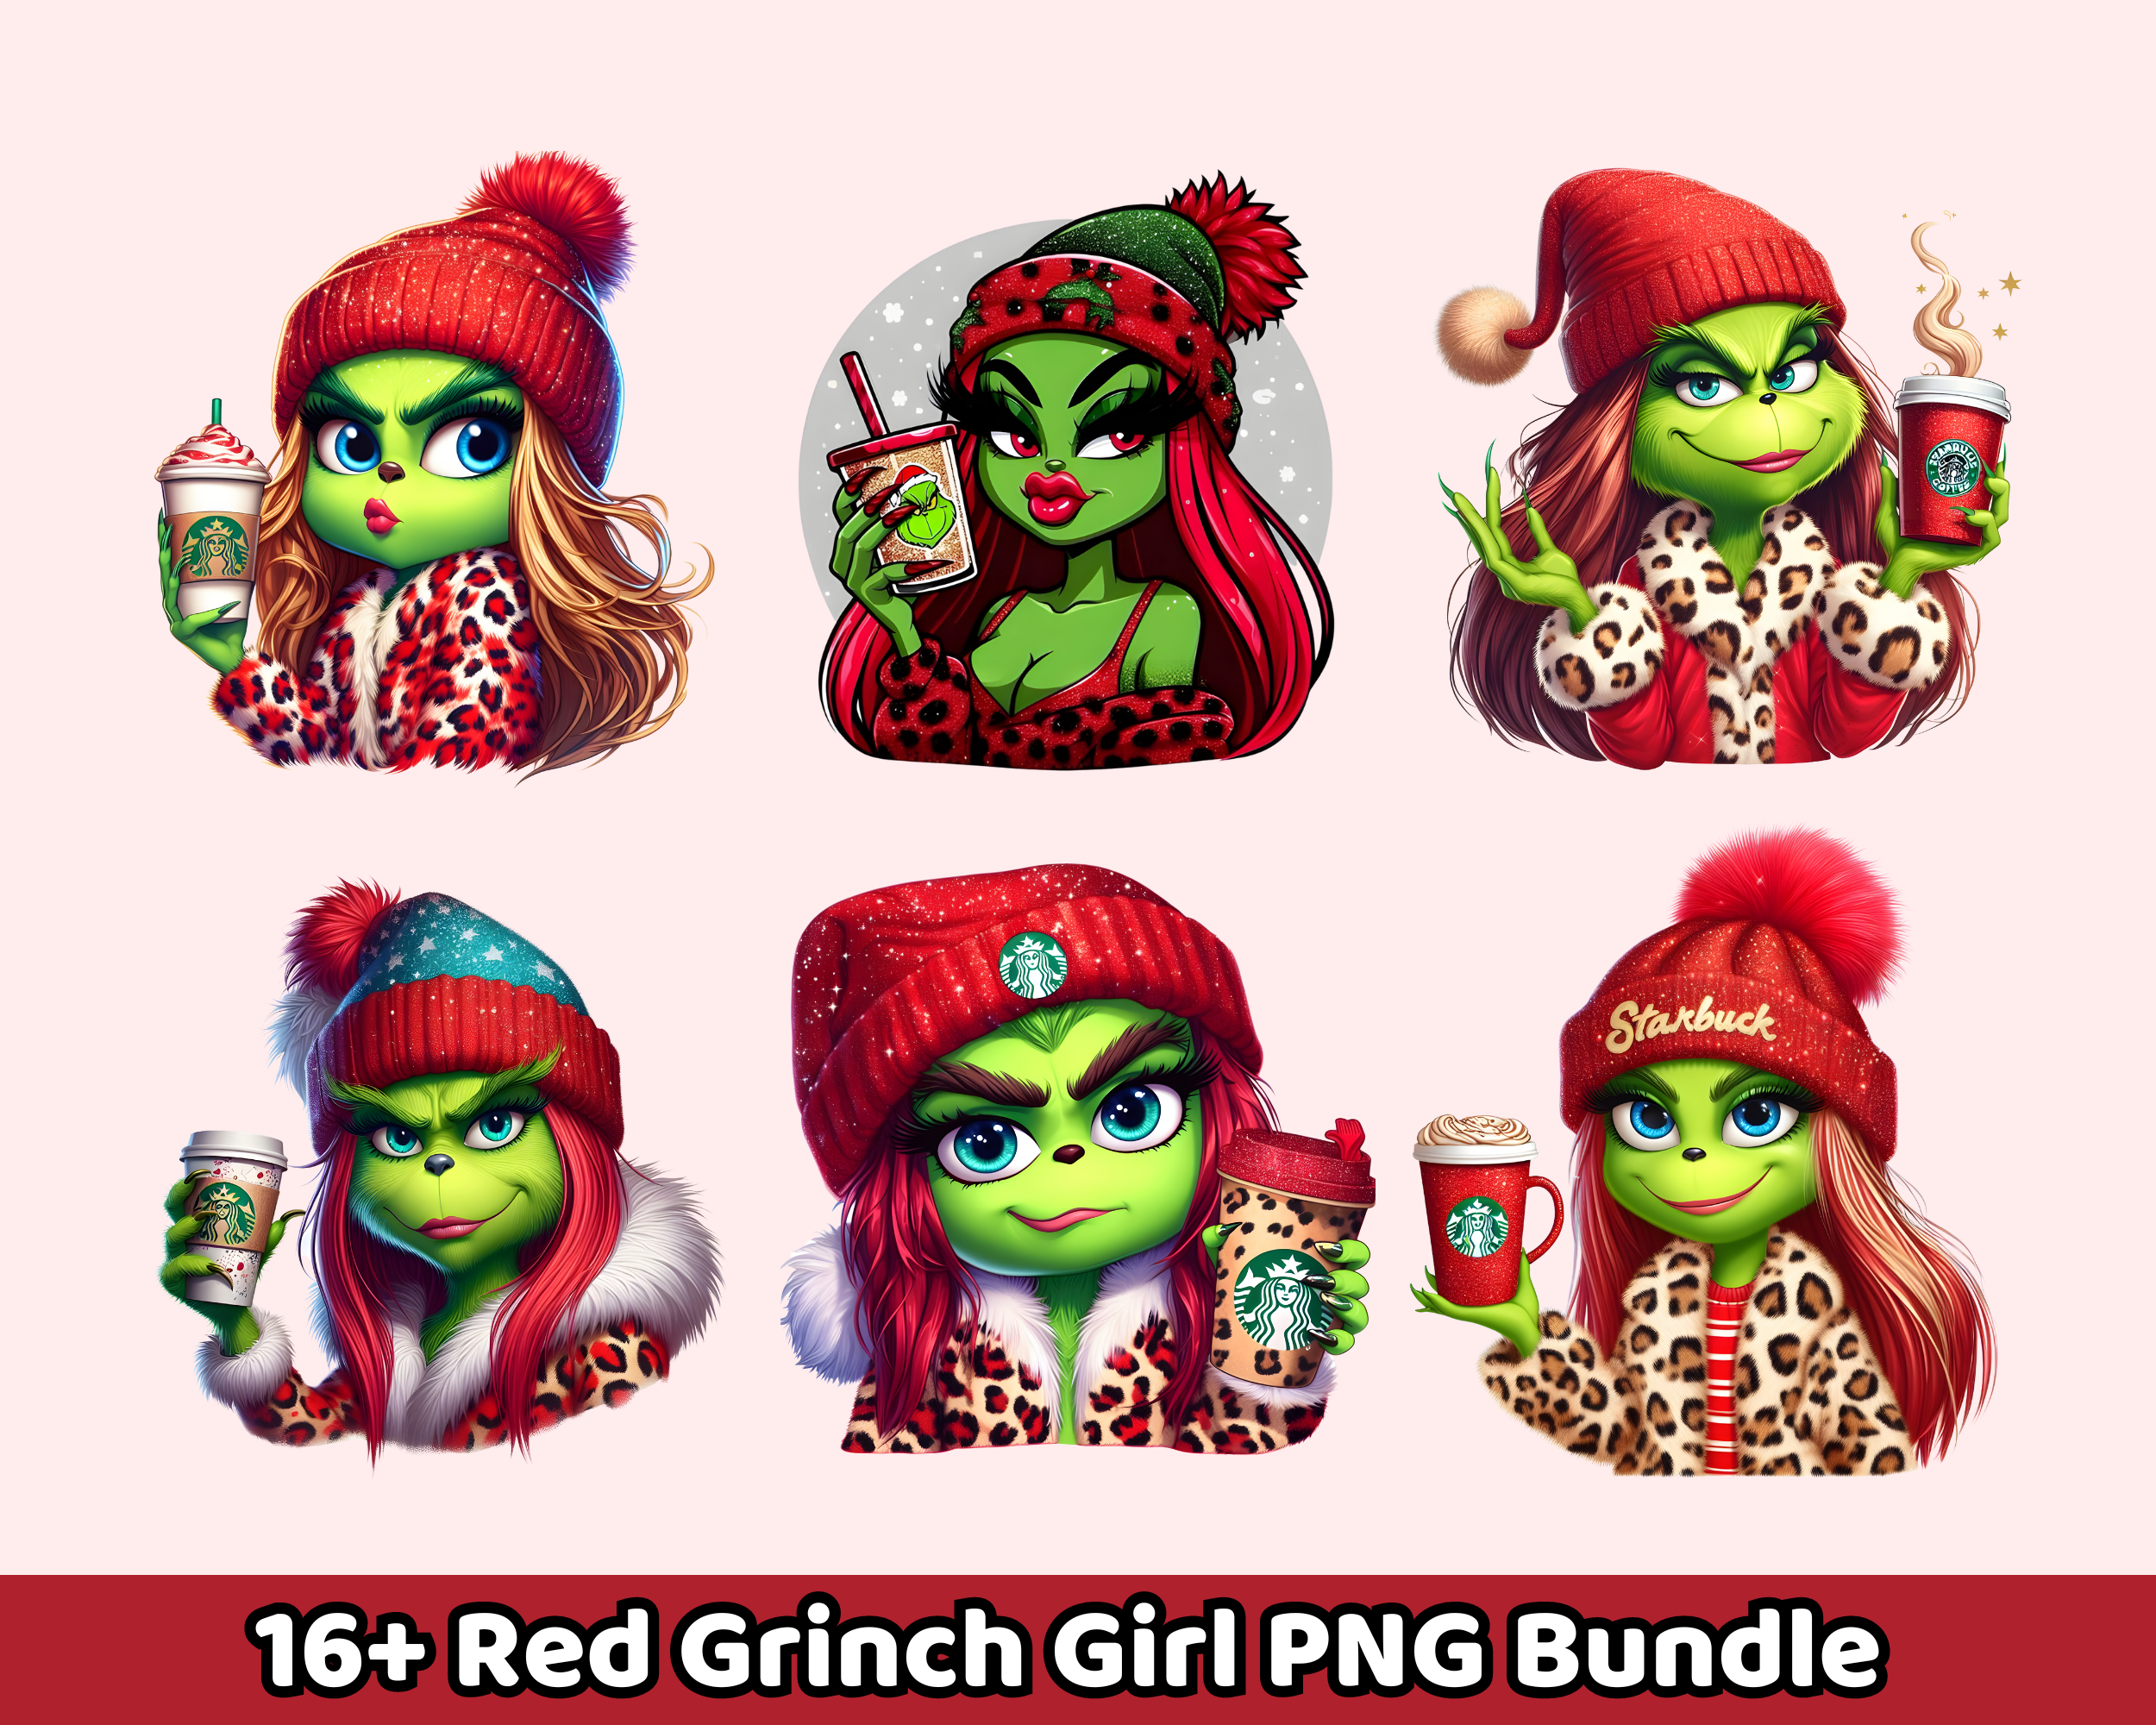 16+ Cute Boujiee Grinch Png, Cute Girl Grinch Png, Christmas Grinch Png, Sublimation, Instant Download